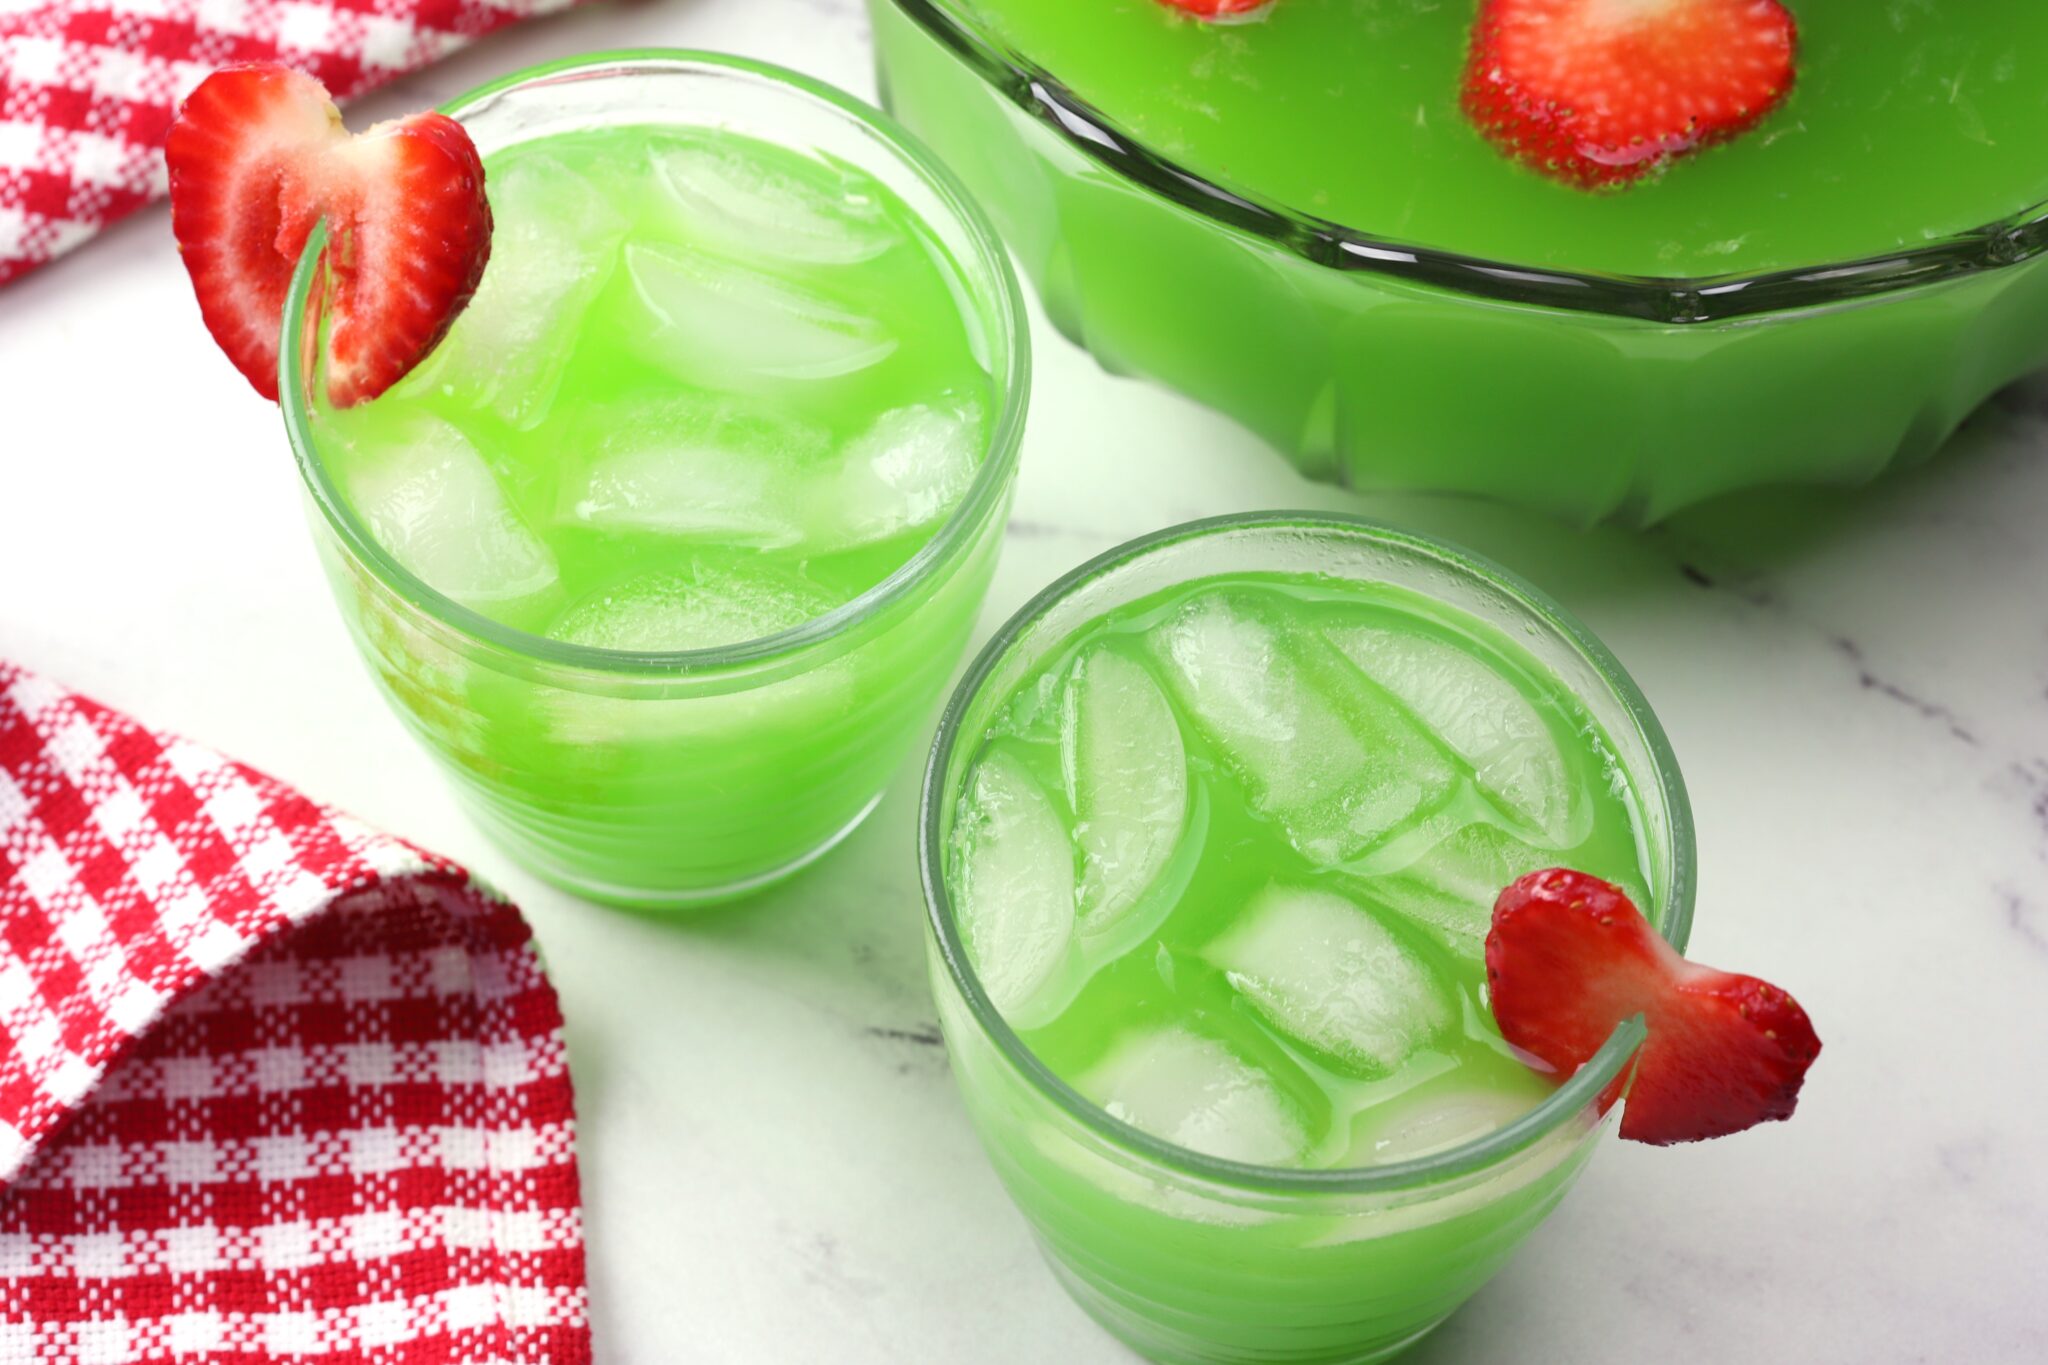 Two glasses of green punch garnished with strawberry slices.